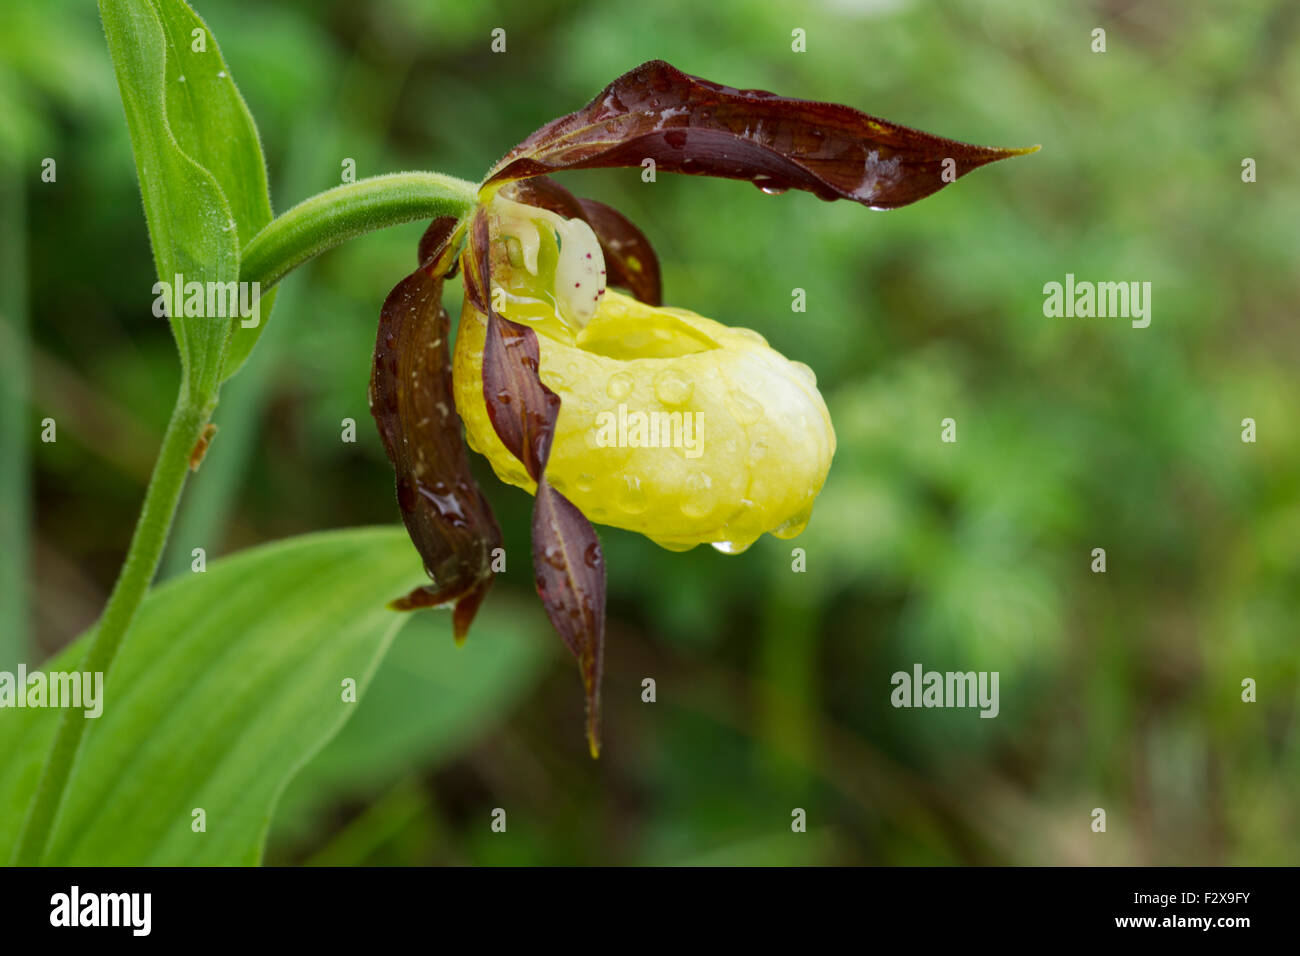 Lady's slipper orchid, Latin name Cypripedium calceolus, yellow, covered in raindrops Stock Photo